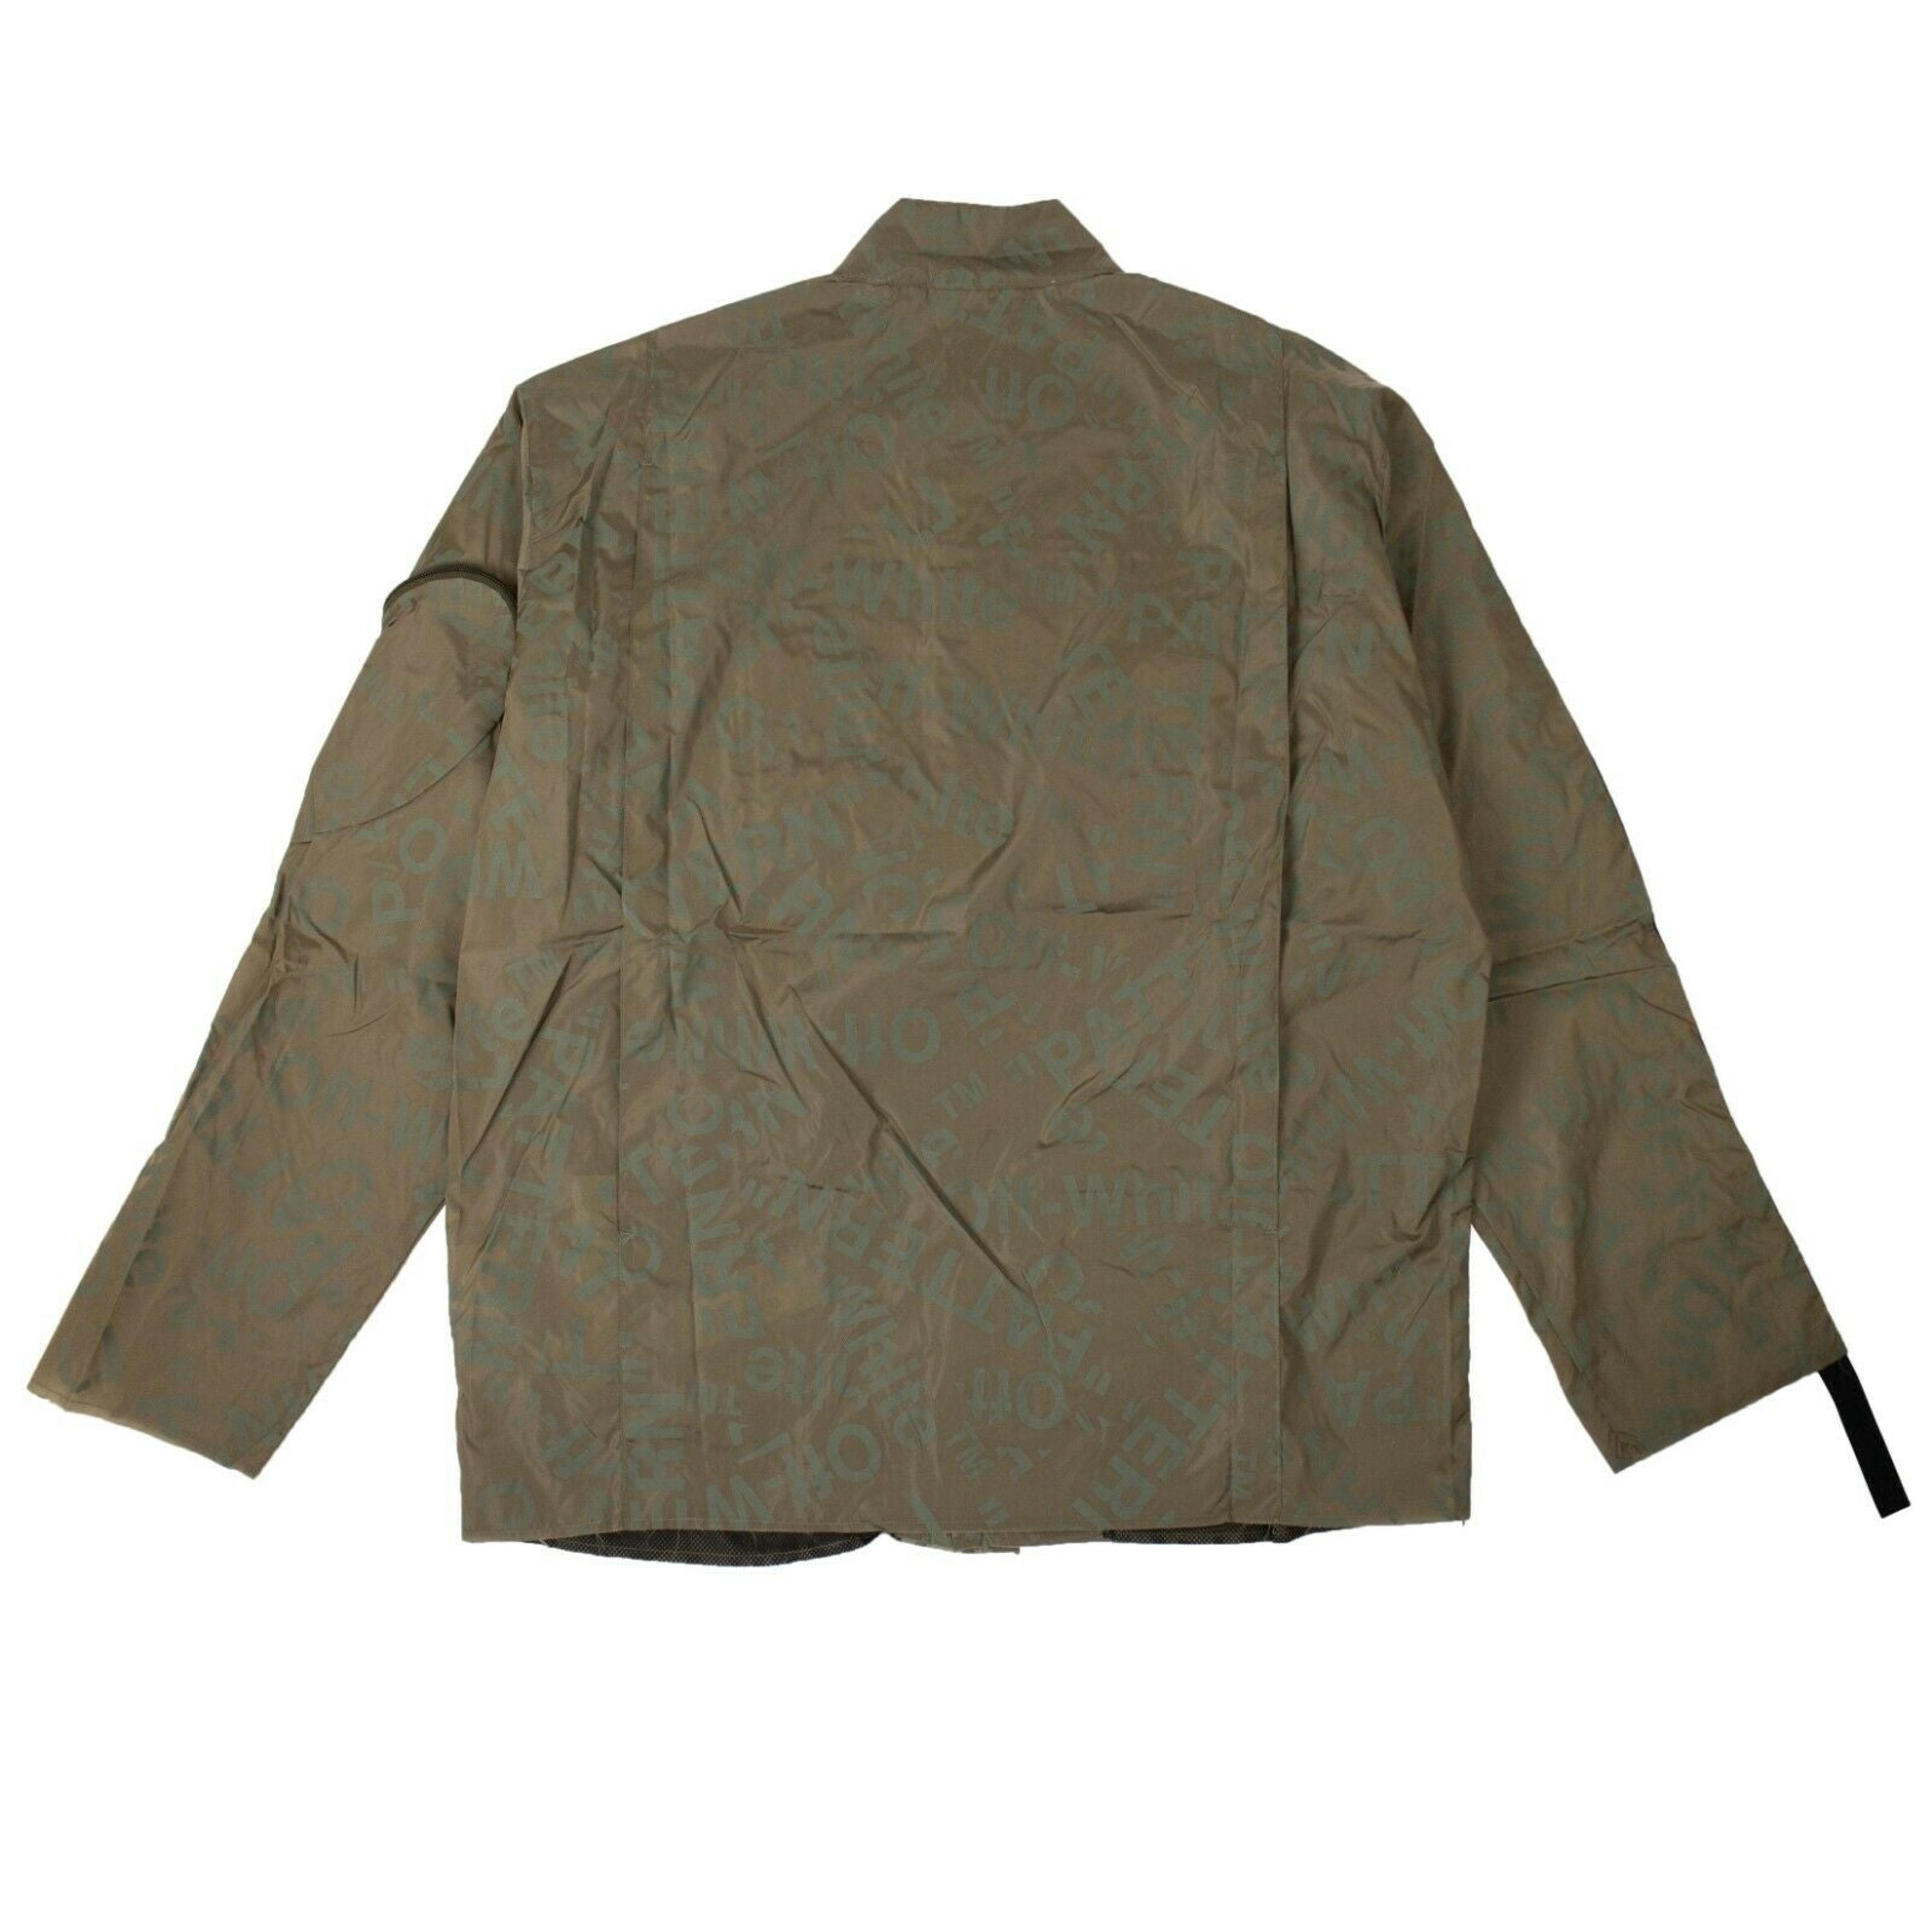 Alternate View 1 of Green All Over Logo Print Jacket